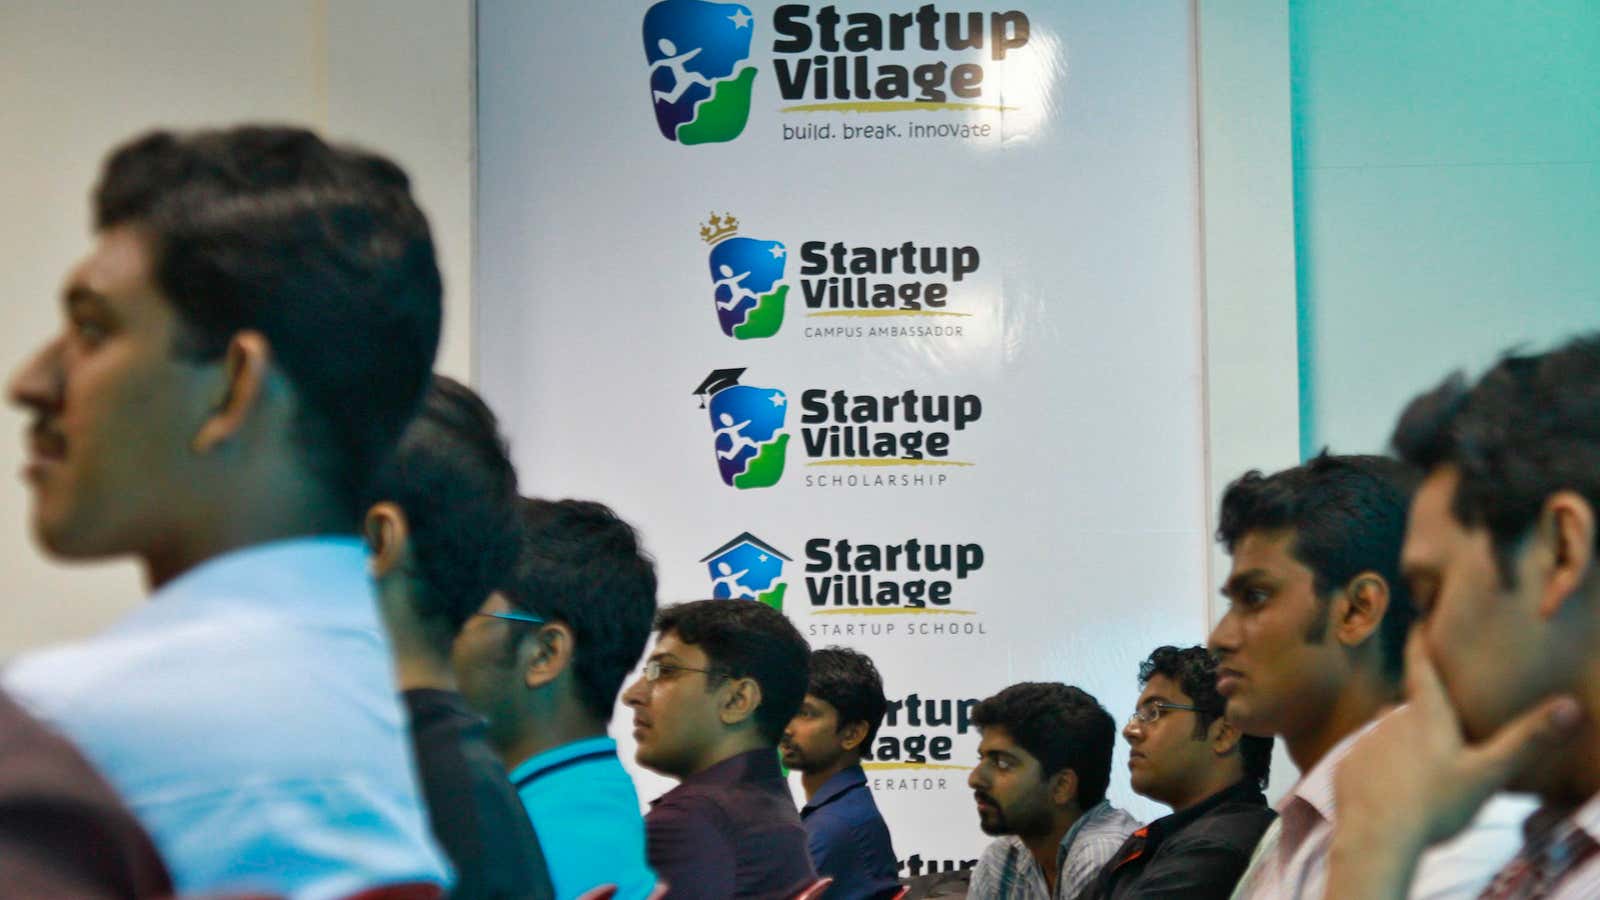 Startups find it difficult to even get information on how to get funded by government agencies such as SIDBI.